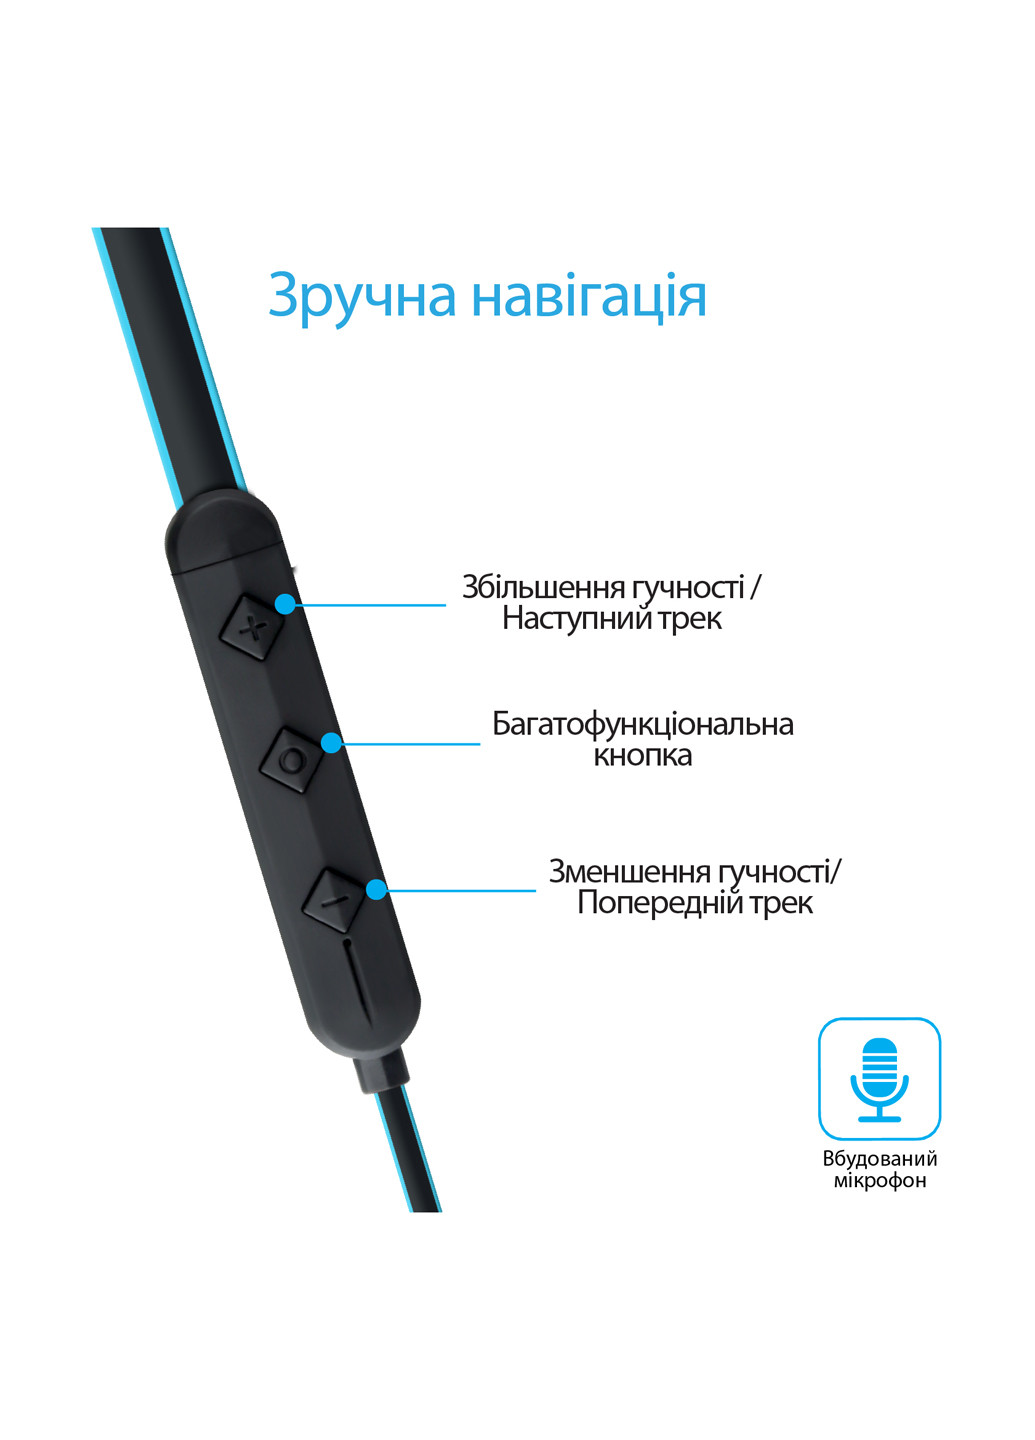 Bluetooth навушники Promate spicy-1 blue (spicy-1.blue) (137956977)